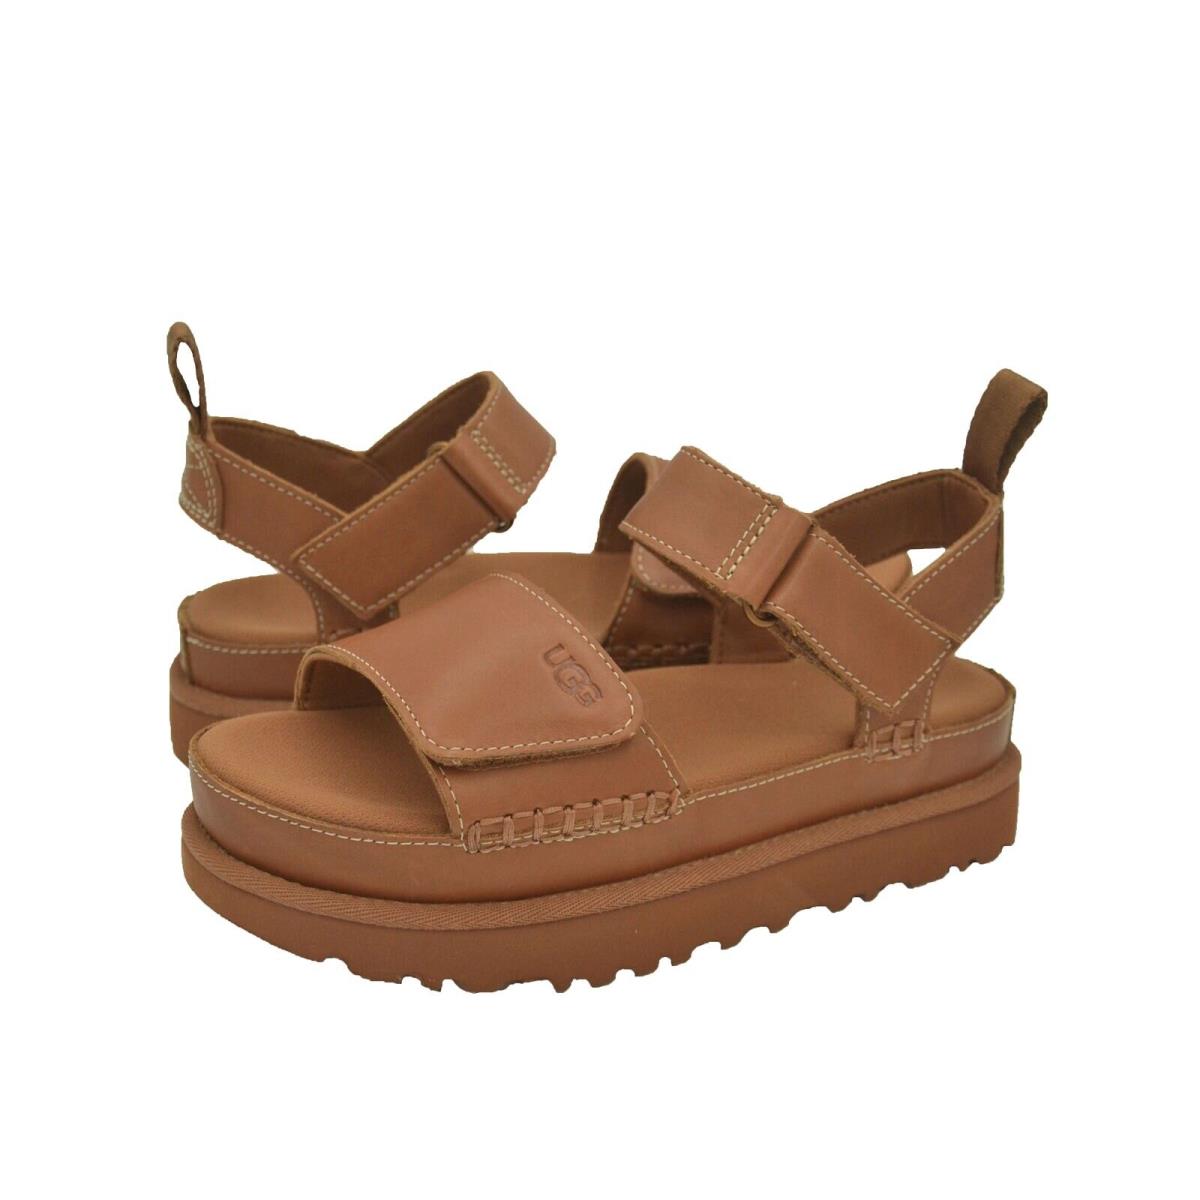 Women`s Shoes Ugg Goldenstar Leather Sandals 1156431 Tan